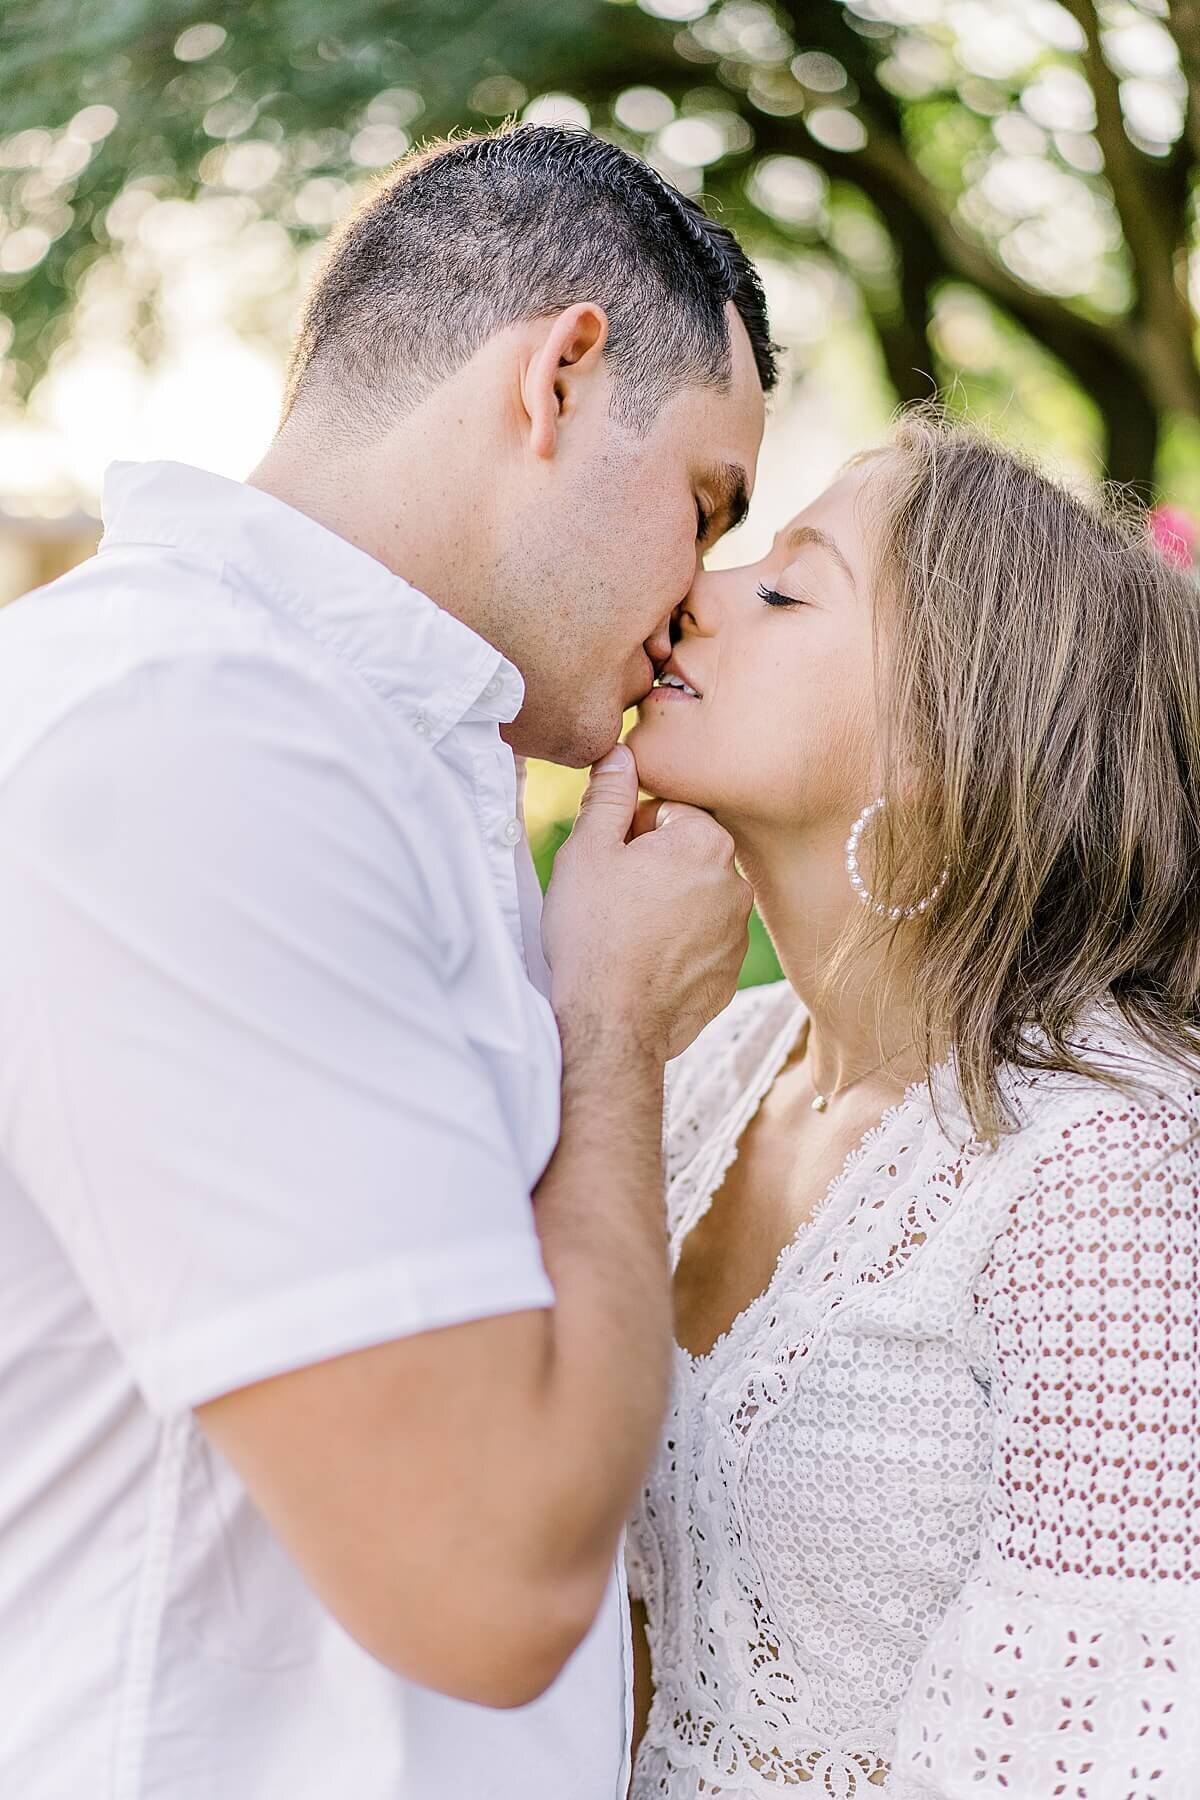 McGovern-Centennial-Gardens-Hermann-Park-Engagement-Session-Alicia-Yarrish-Photography_0006